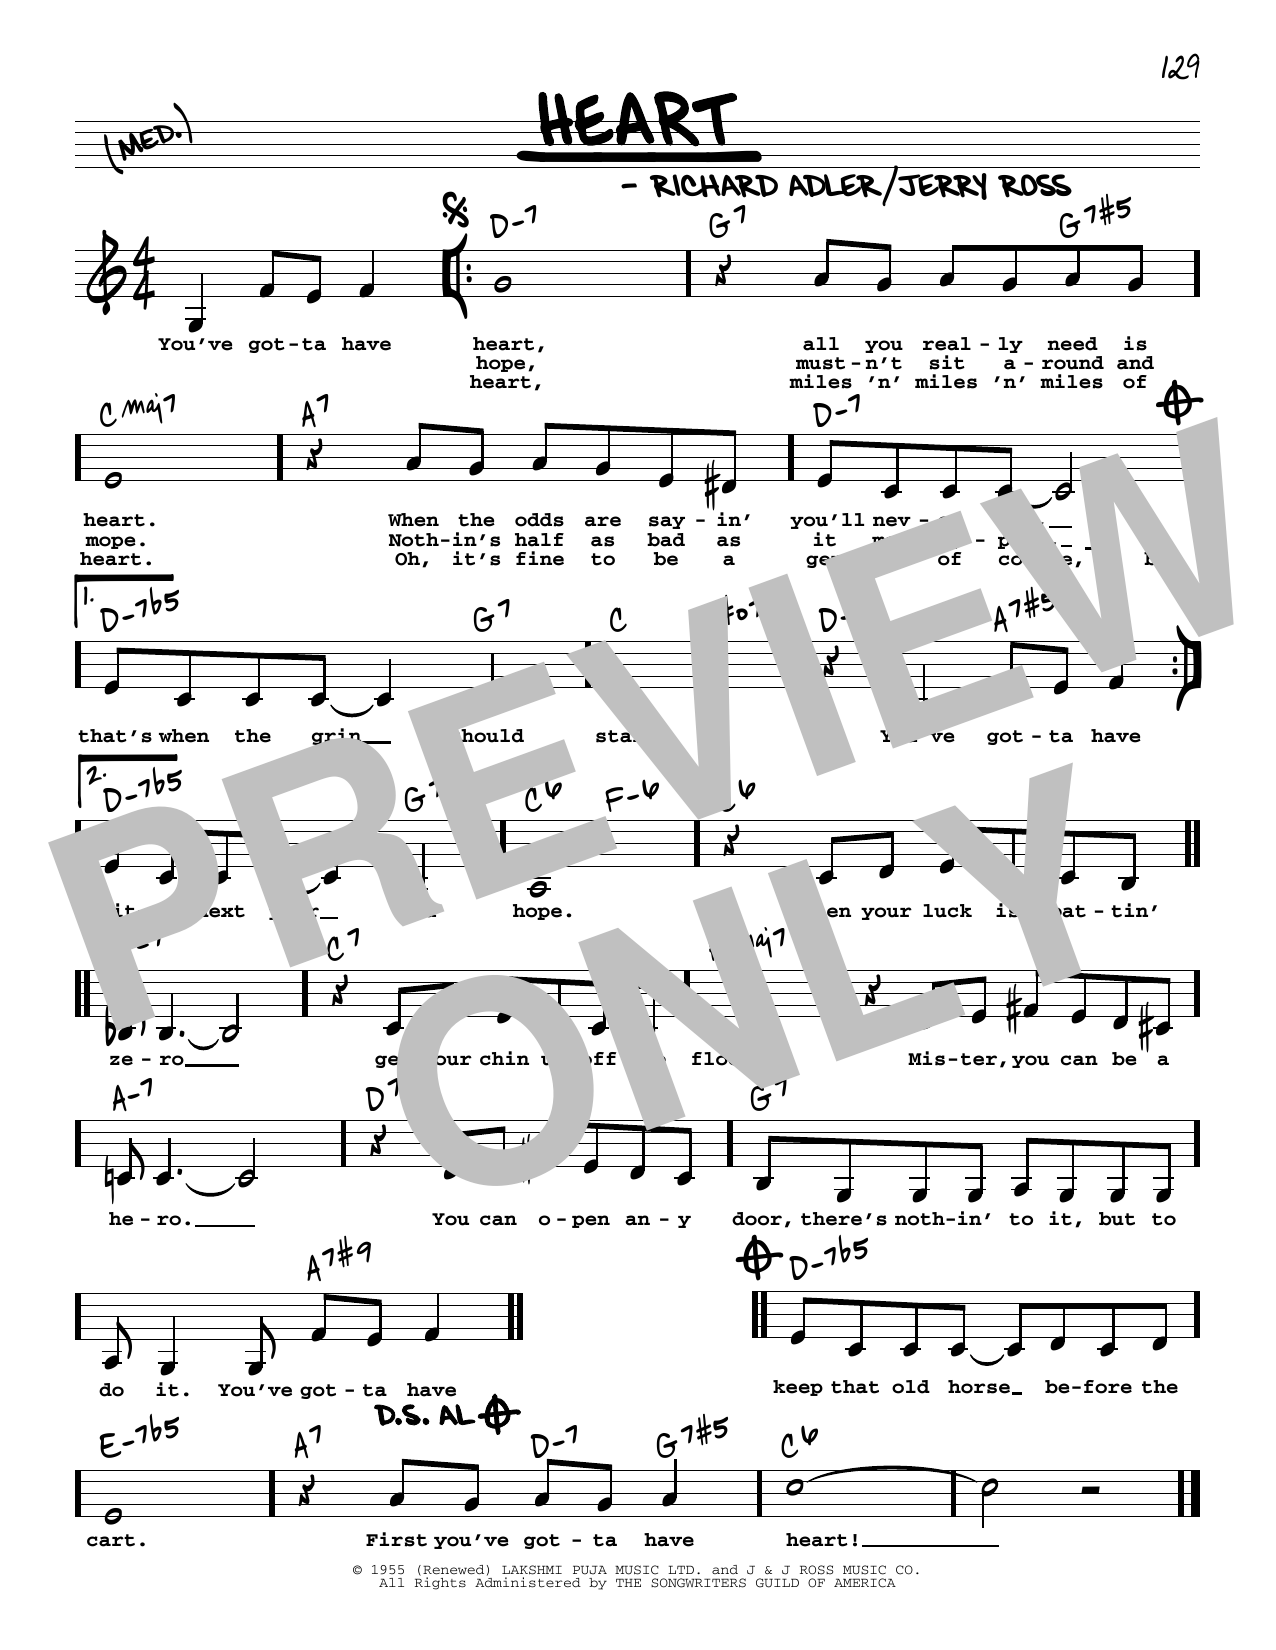 Download Richard Adler and Jerry Ross Heart (Low Voice) Sheet Music